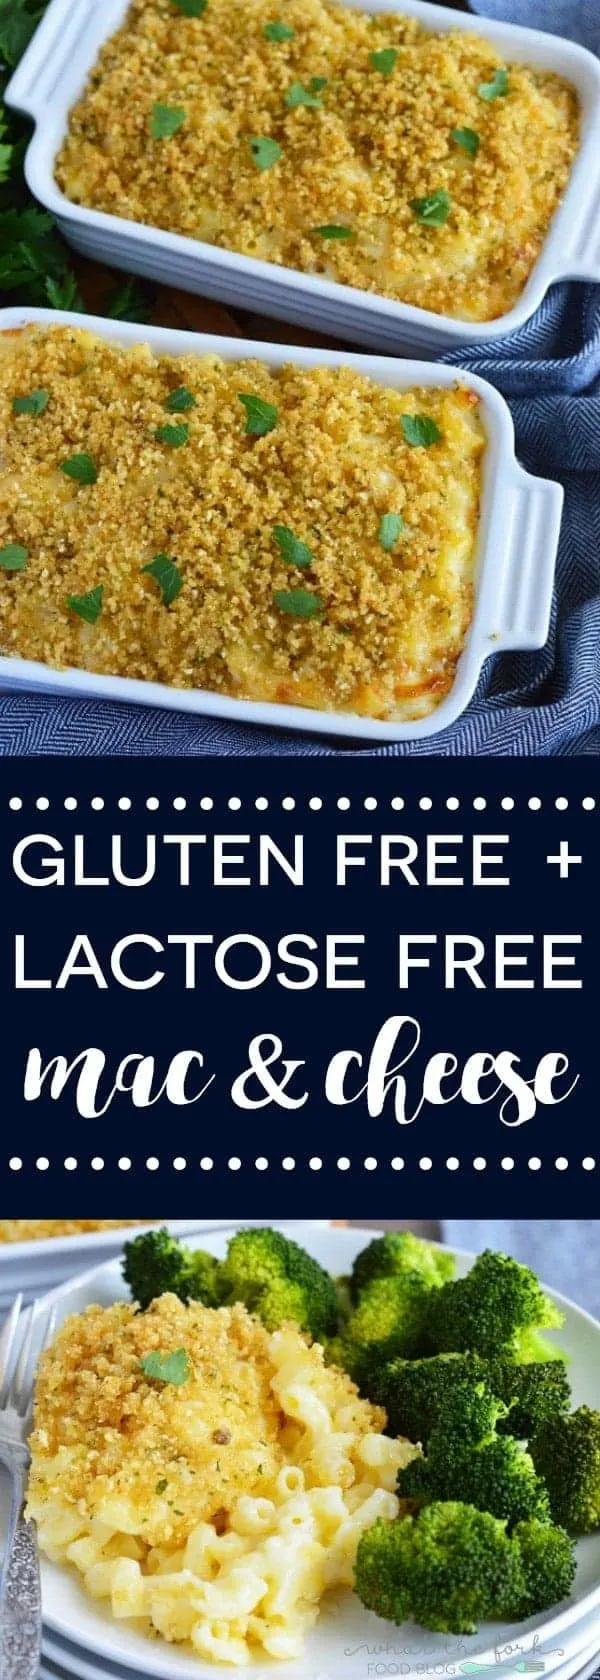 Gluten Free and Lactose Free Macaroni and Cheese from What The Fork Food Blog | whattheforkfoodblog.com | Sponsored by Lactaid |